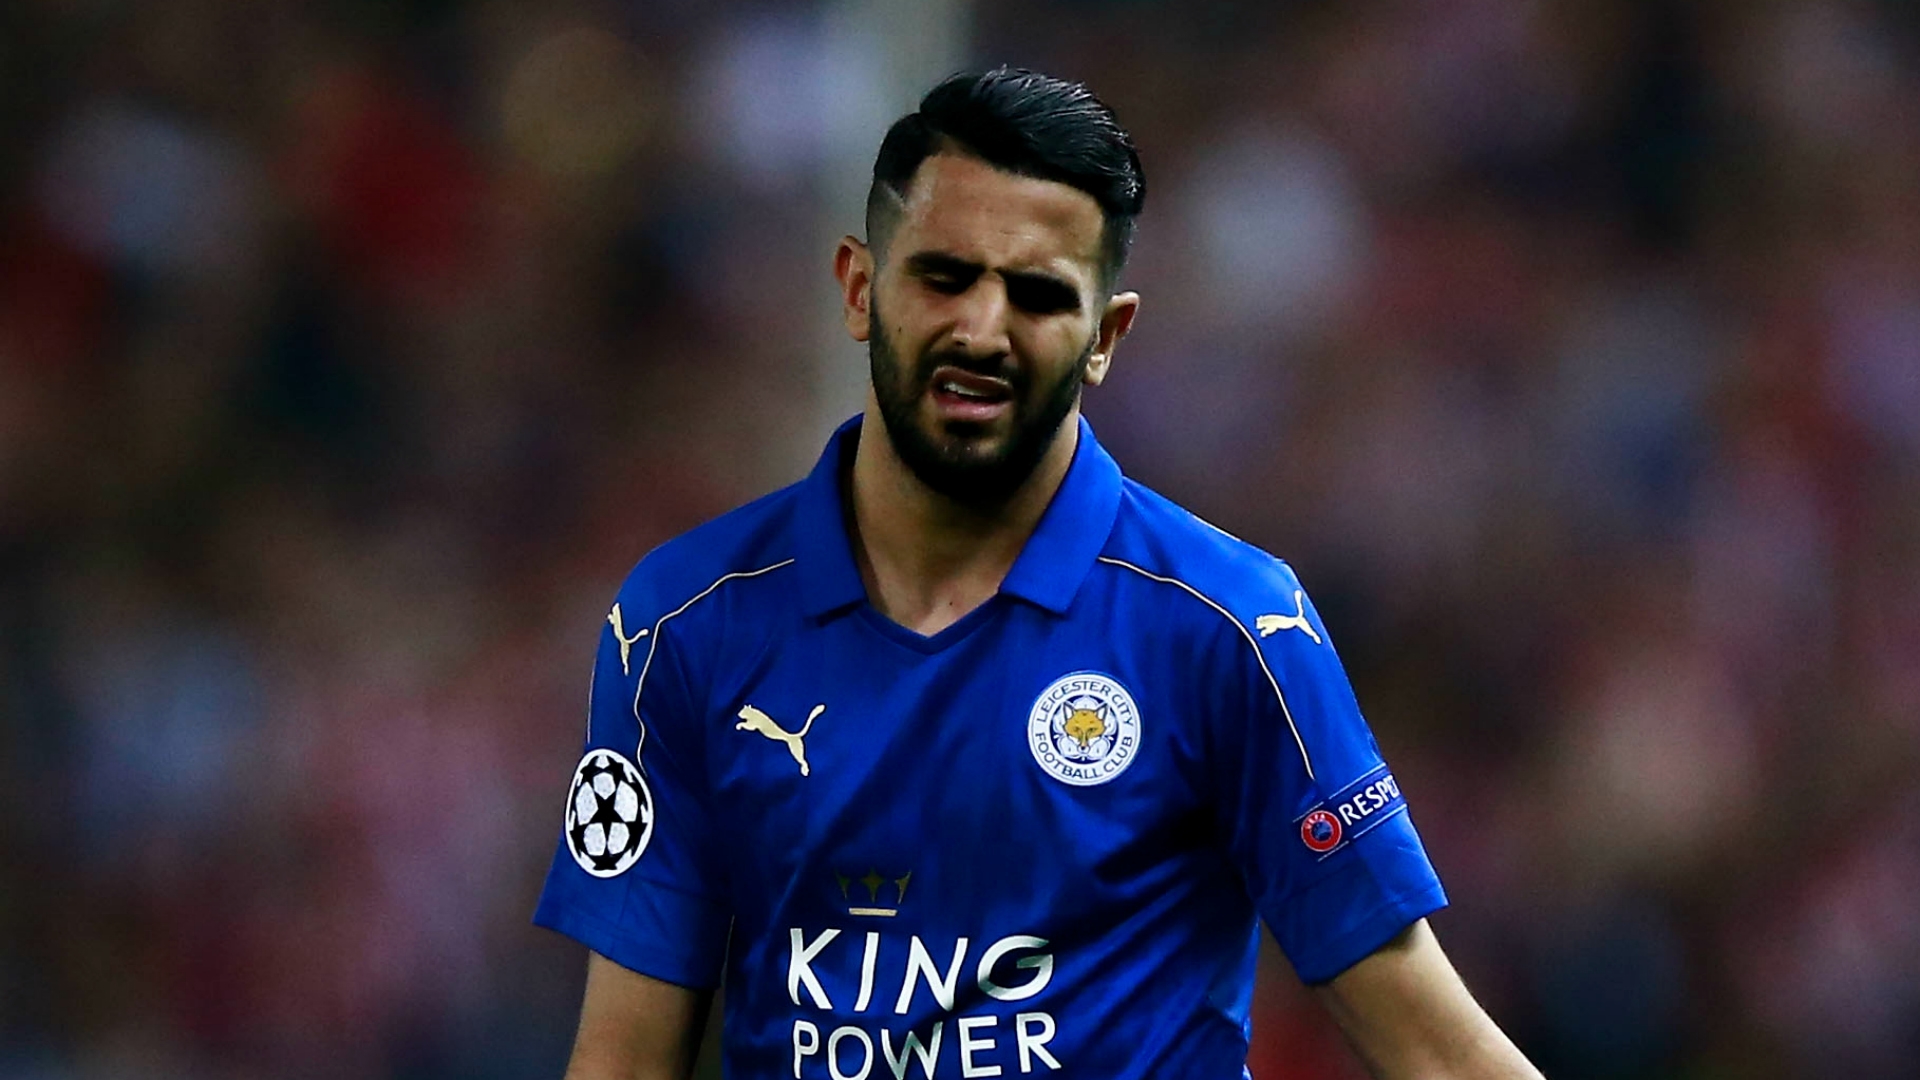 Despite this, Leicester's manager says that no formal offers have been made for Mahrez and therefore there can be no talks regarding his departure at this time. 